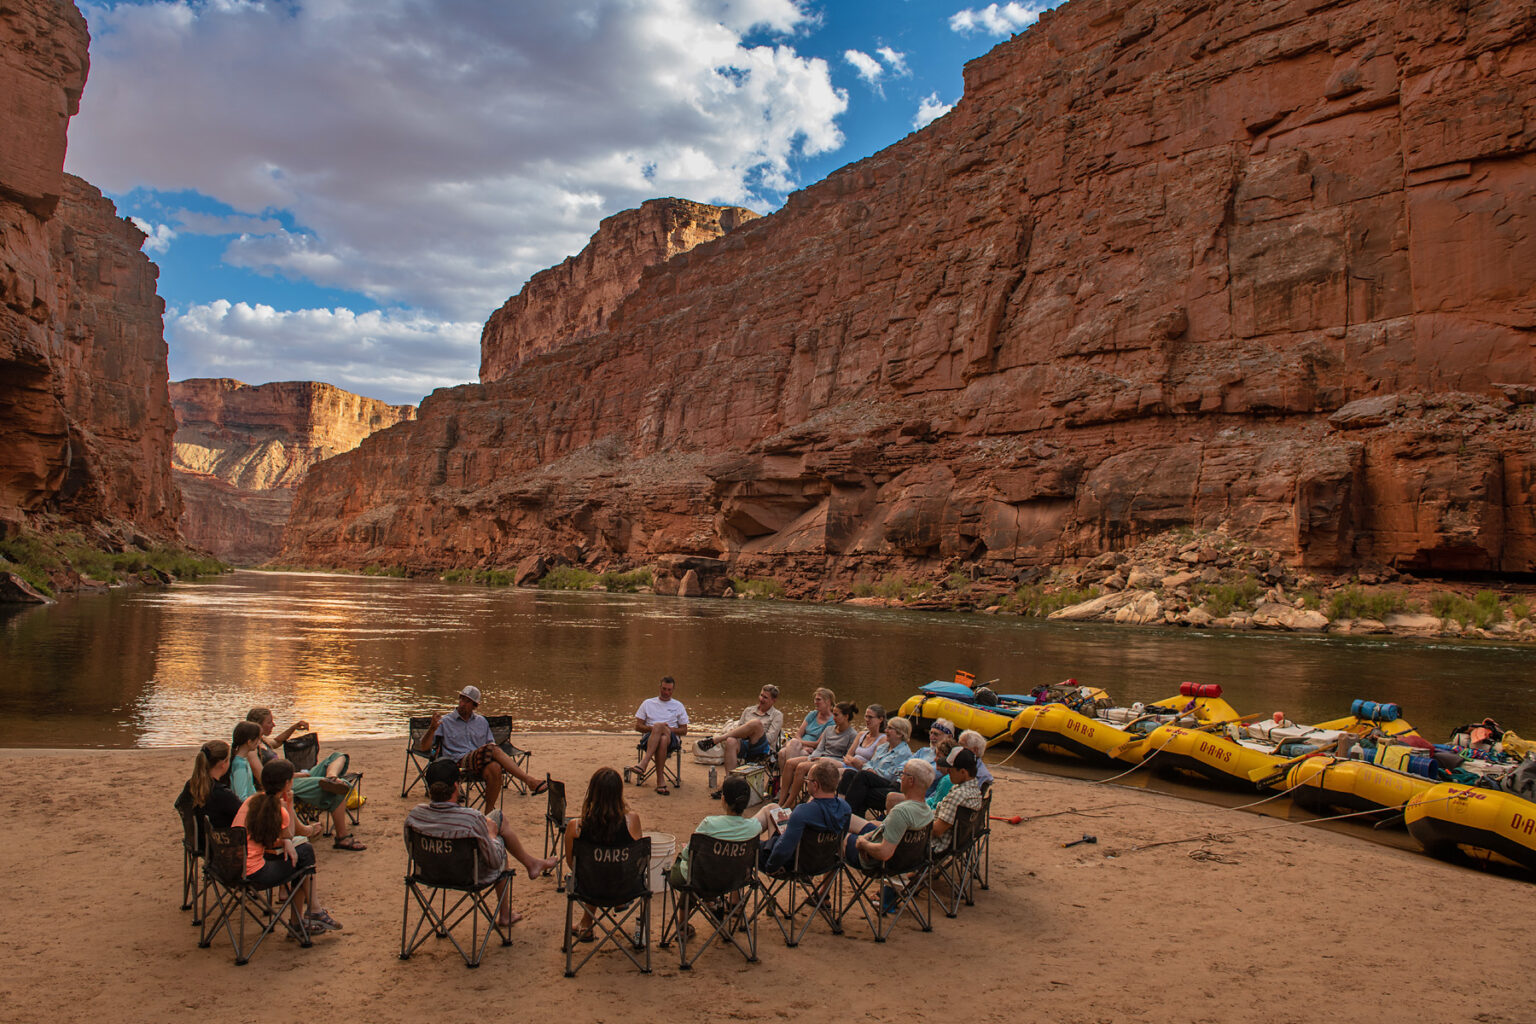 guides and guests in a chair circle on a sandy beach in Grand Canyon with five OARS rafts docked and staked for the night